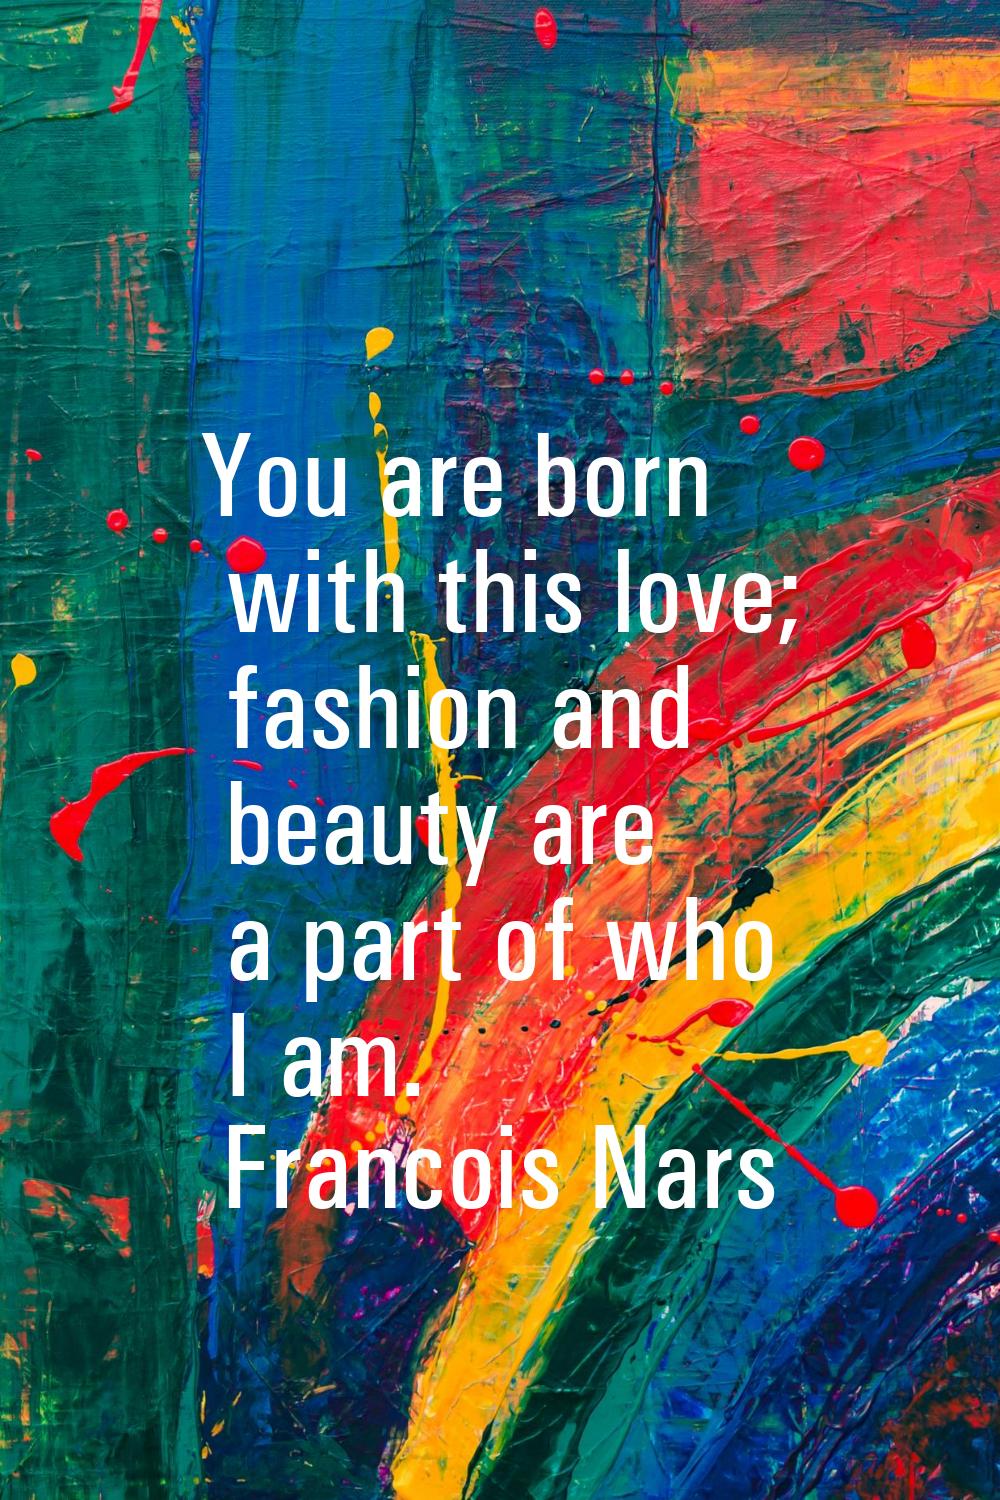 You are born with this love; fashion and beauty are a part of who I am.